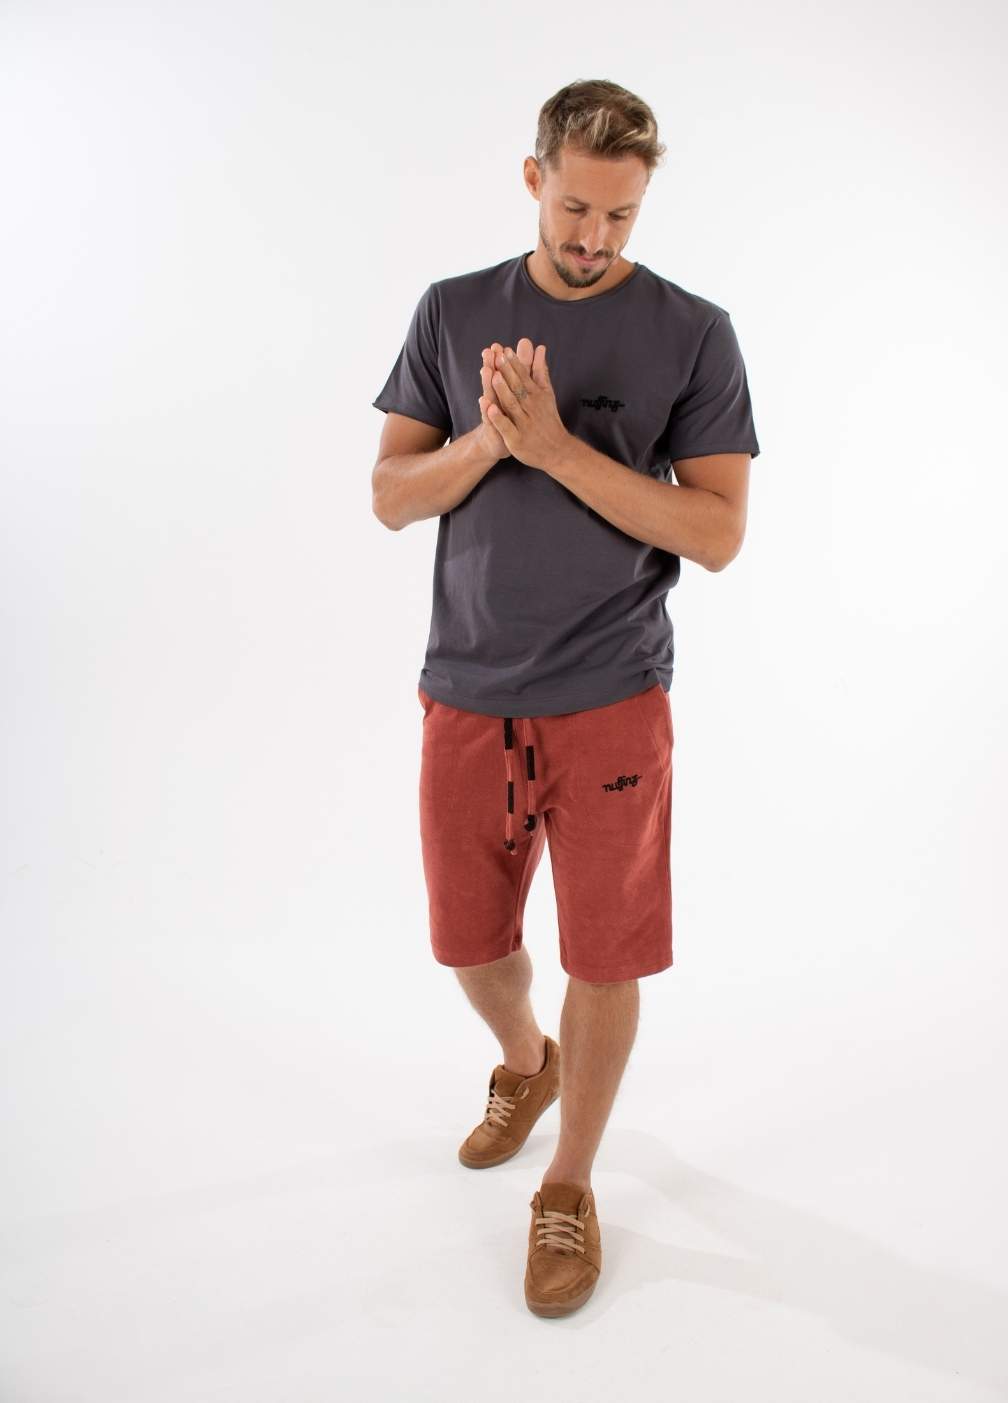 nuffinz TANDOORI SPICE TOWEL SHORTS - whole outfit visible from the front - made out of organic terry cloth - sustainable men's shorts - red unicolor